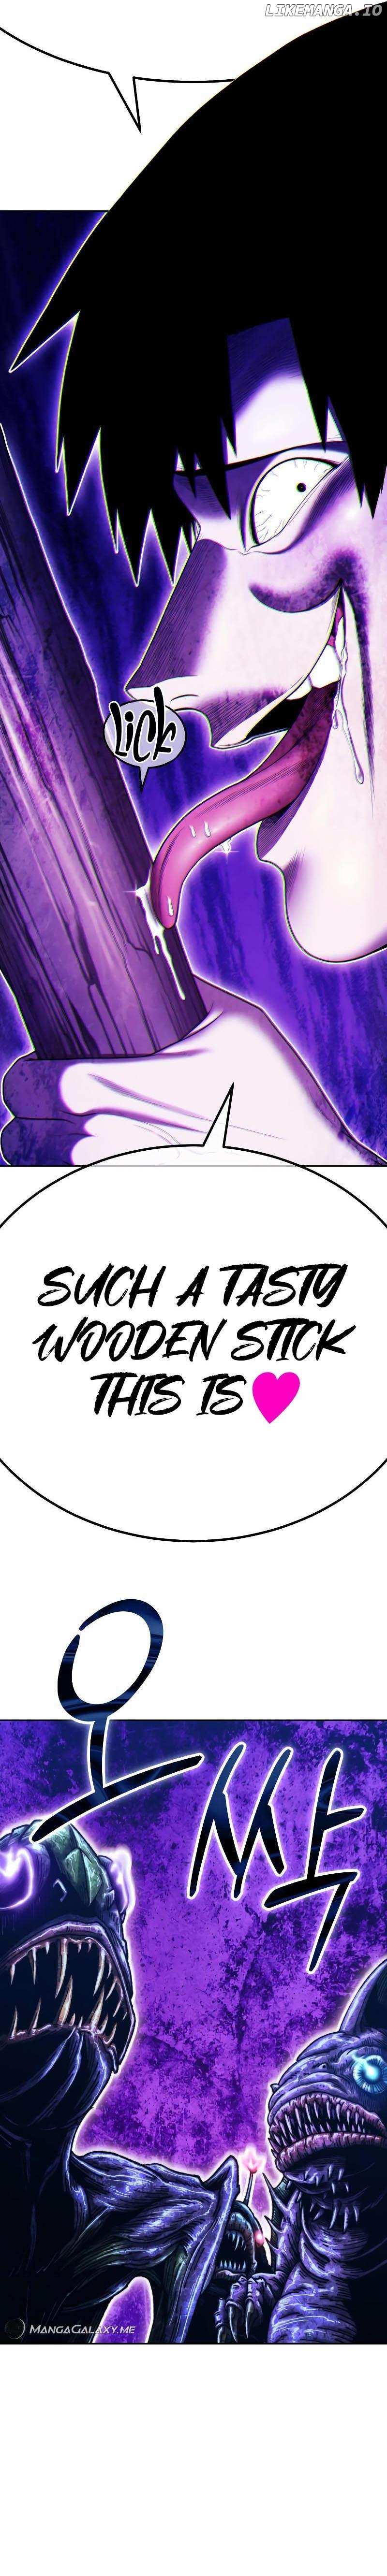 +99 Wooden stick Chapter 89.1 - page 16